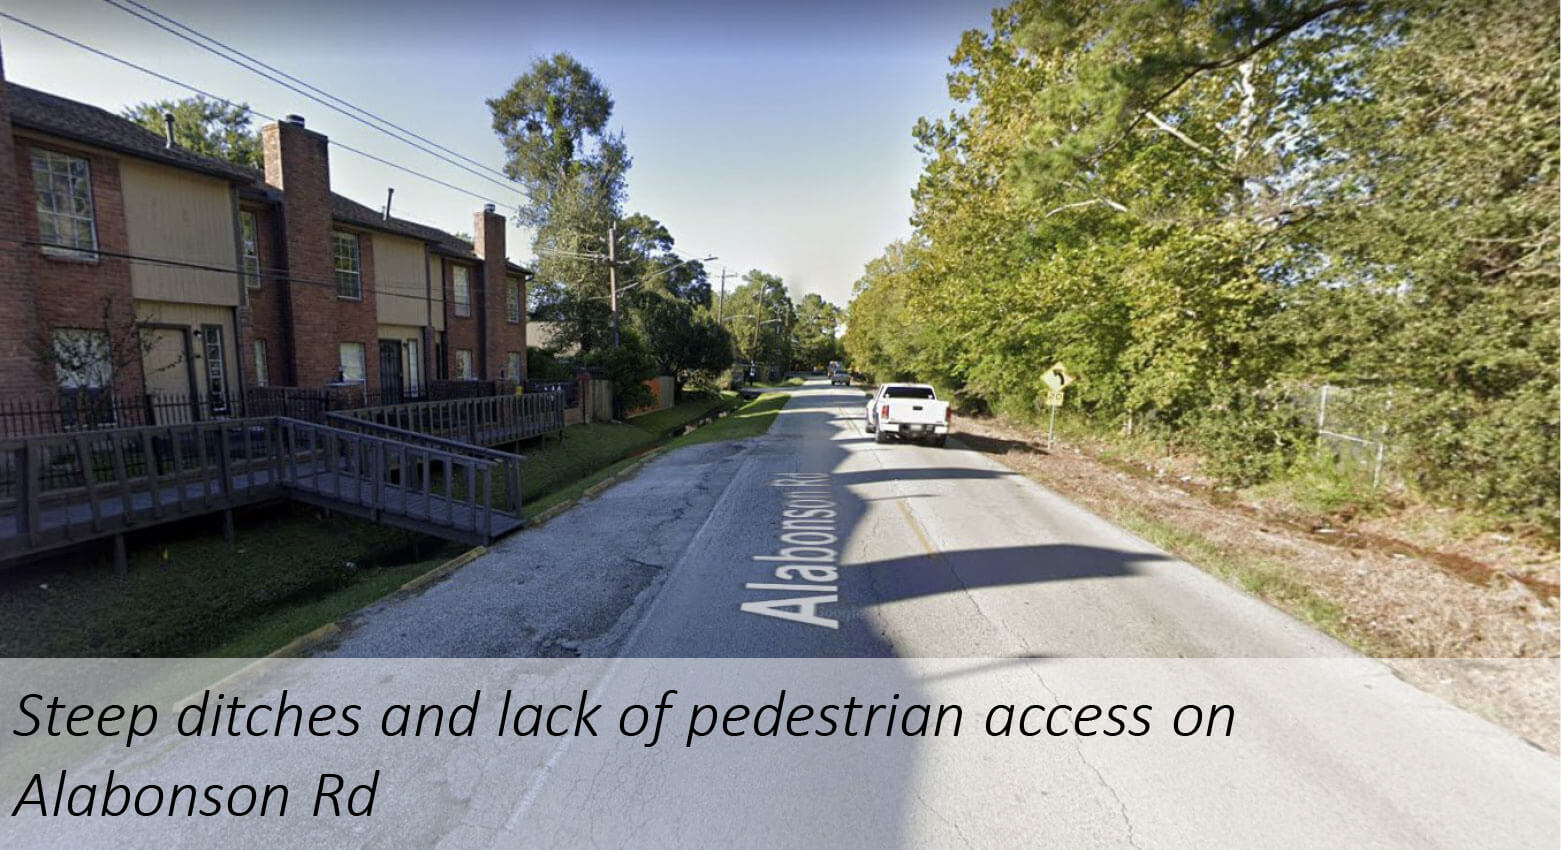 Steep ditches and lack of pedestrian access on Alabonson Rd